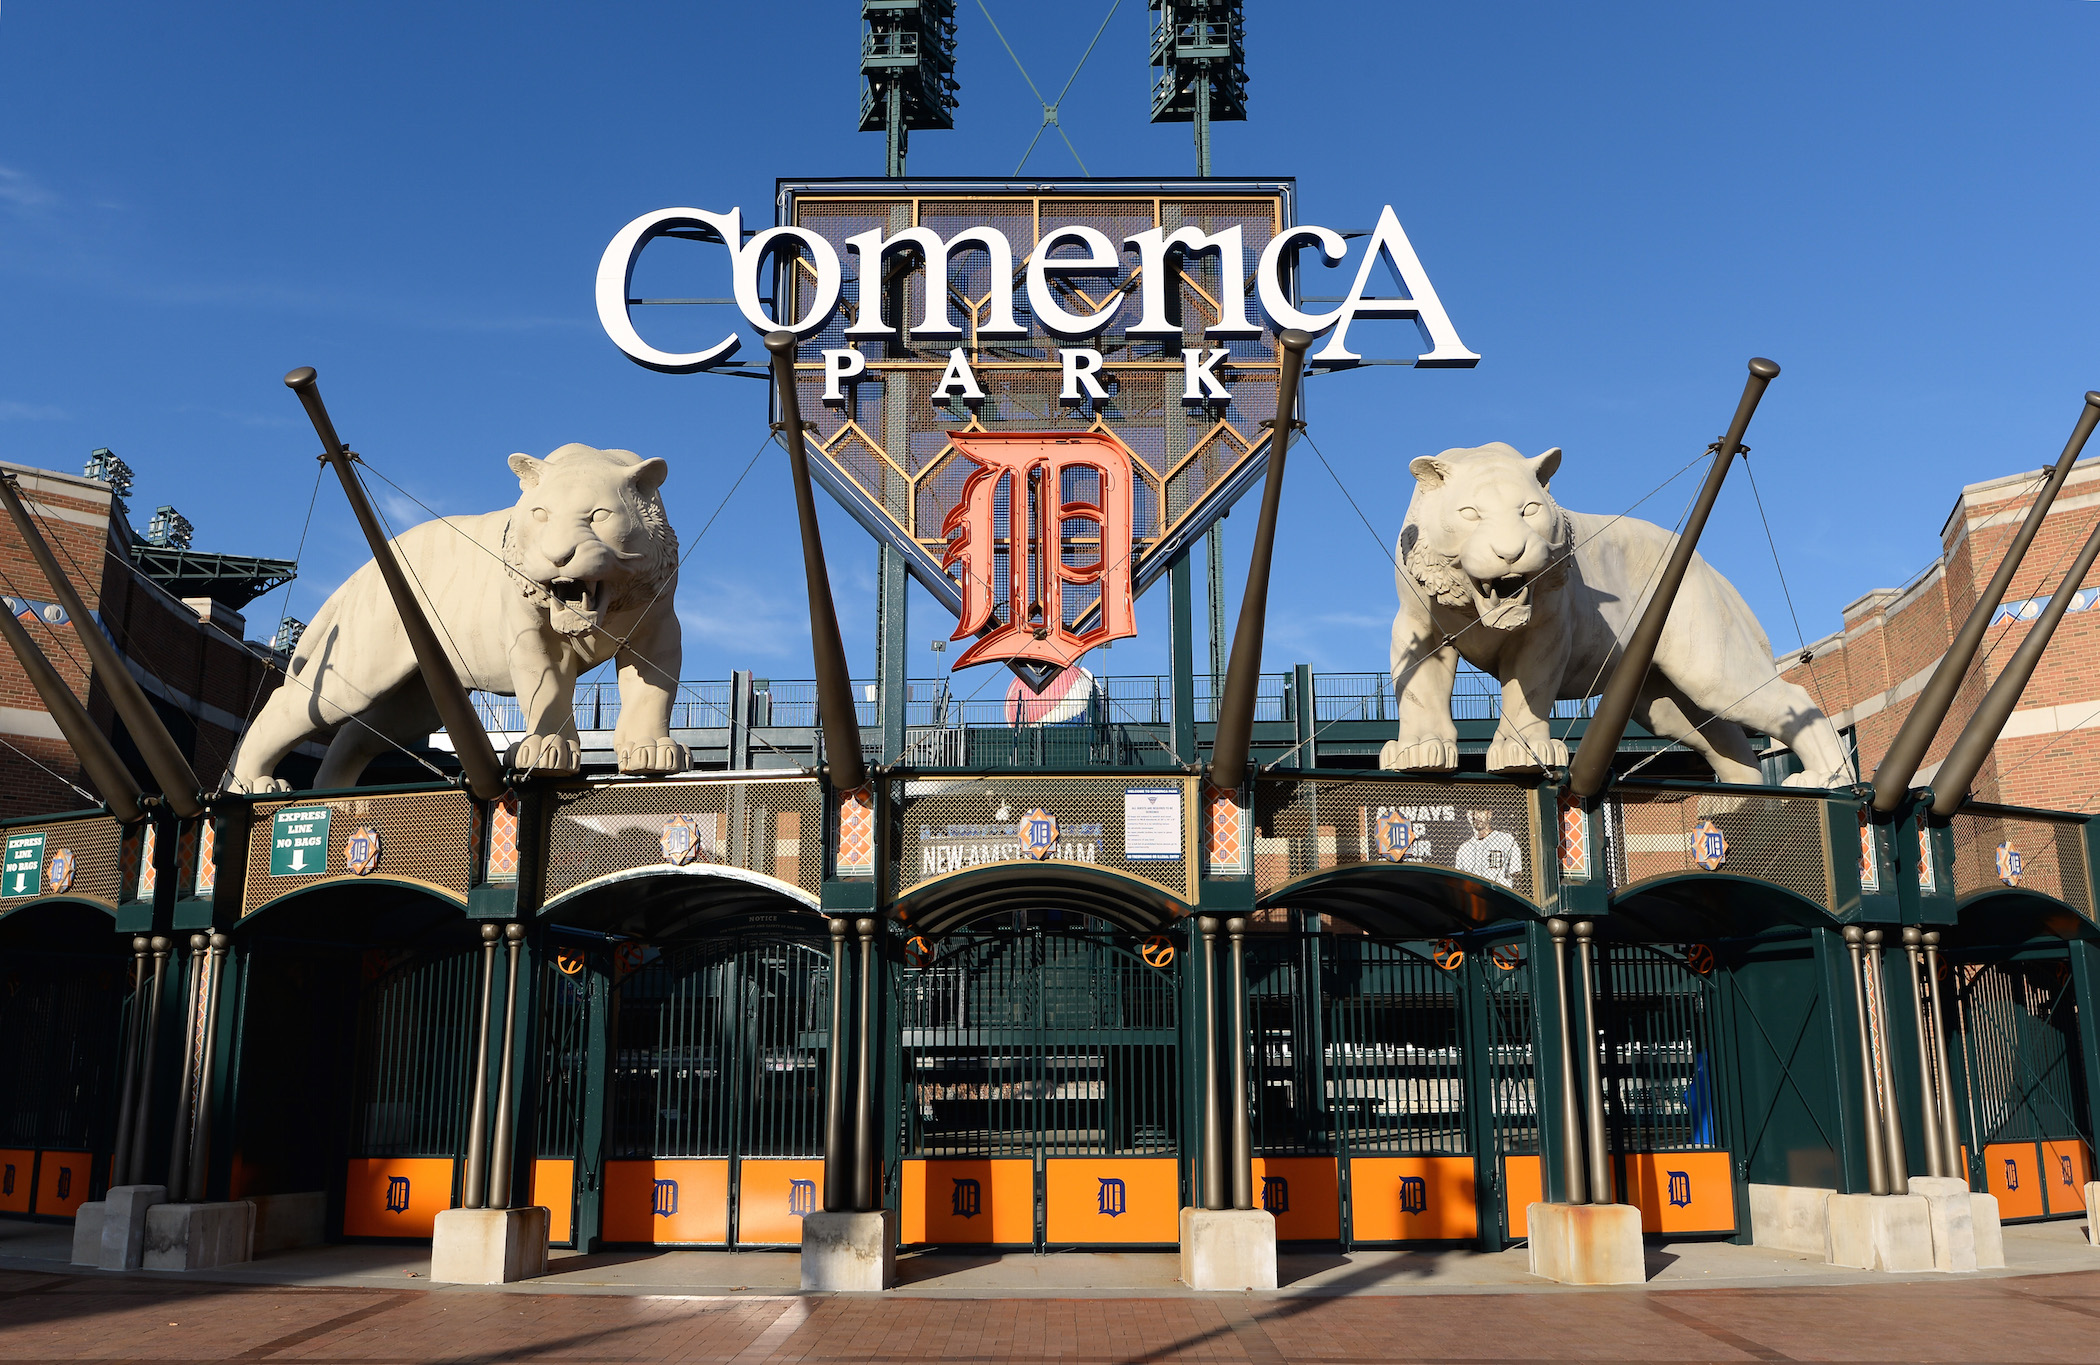 Employee Fired for Allegedly Spitting into Pizza at Comerica Park